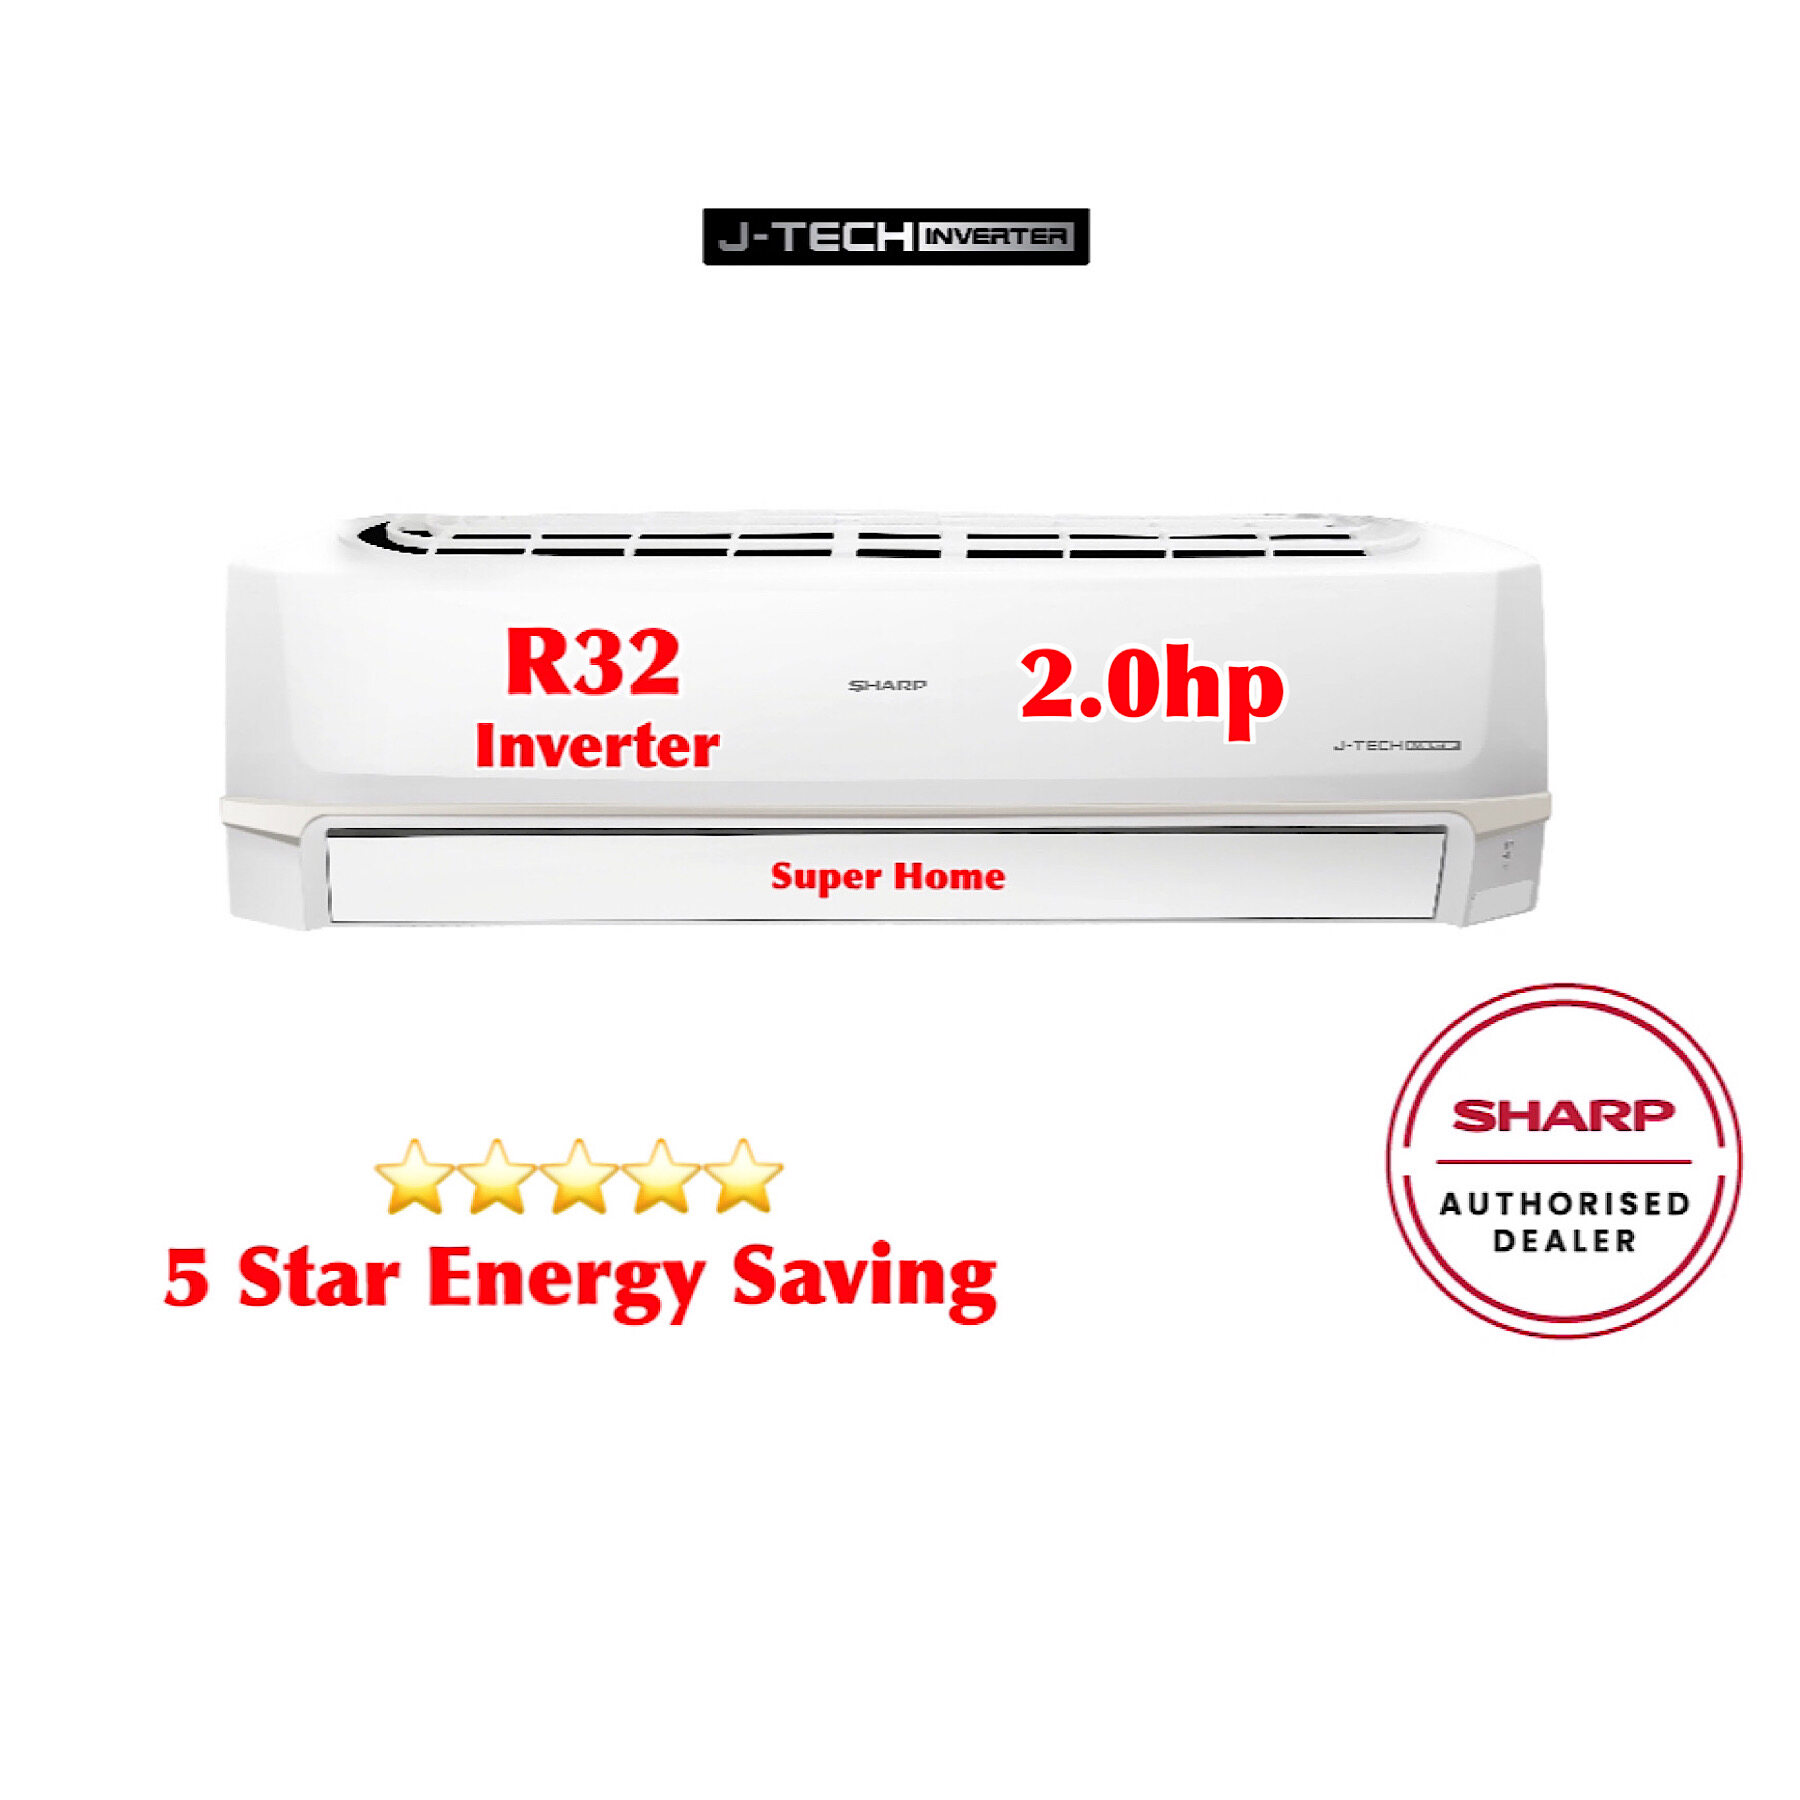 Sharp R32 J-Tech Standard Inverter Aircond AHX18VED & AUX18VED 2.0hp R32 Inverter Air Conditioner - 5 Star Energy Saving